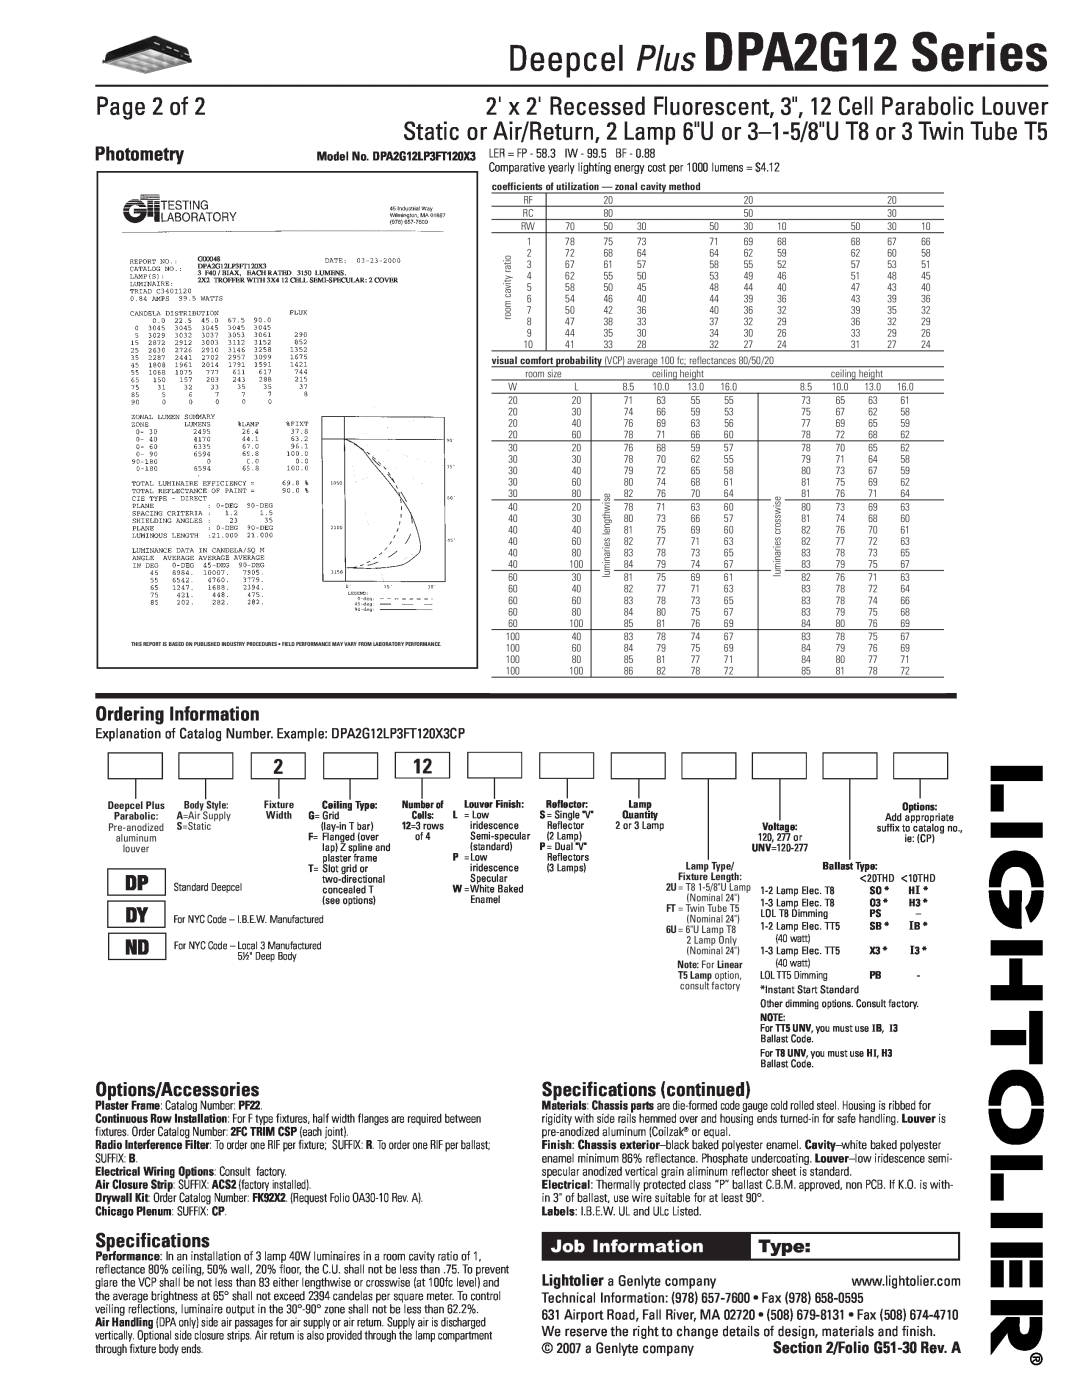 Lightolier DPA2G12 Series Page 2 of, Photometry, Ordering Information, Options/Accessories, Specifications, Dp Dy Nd 